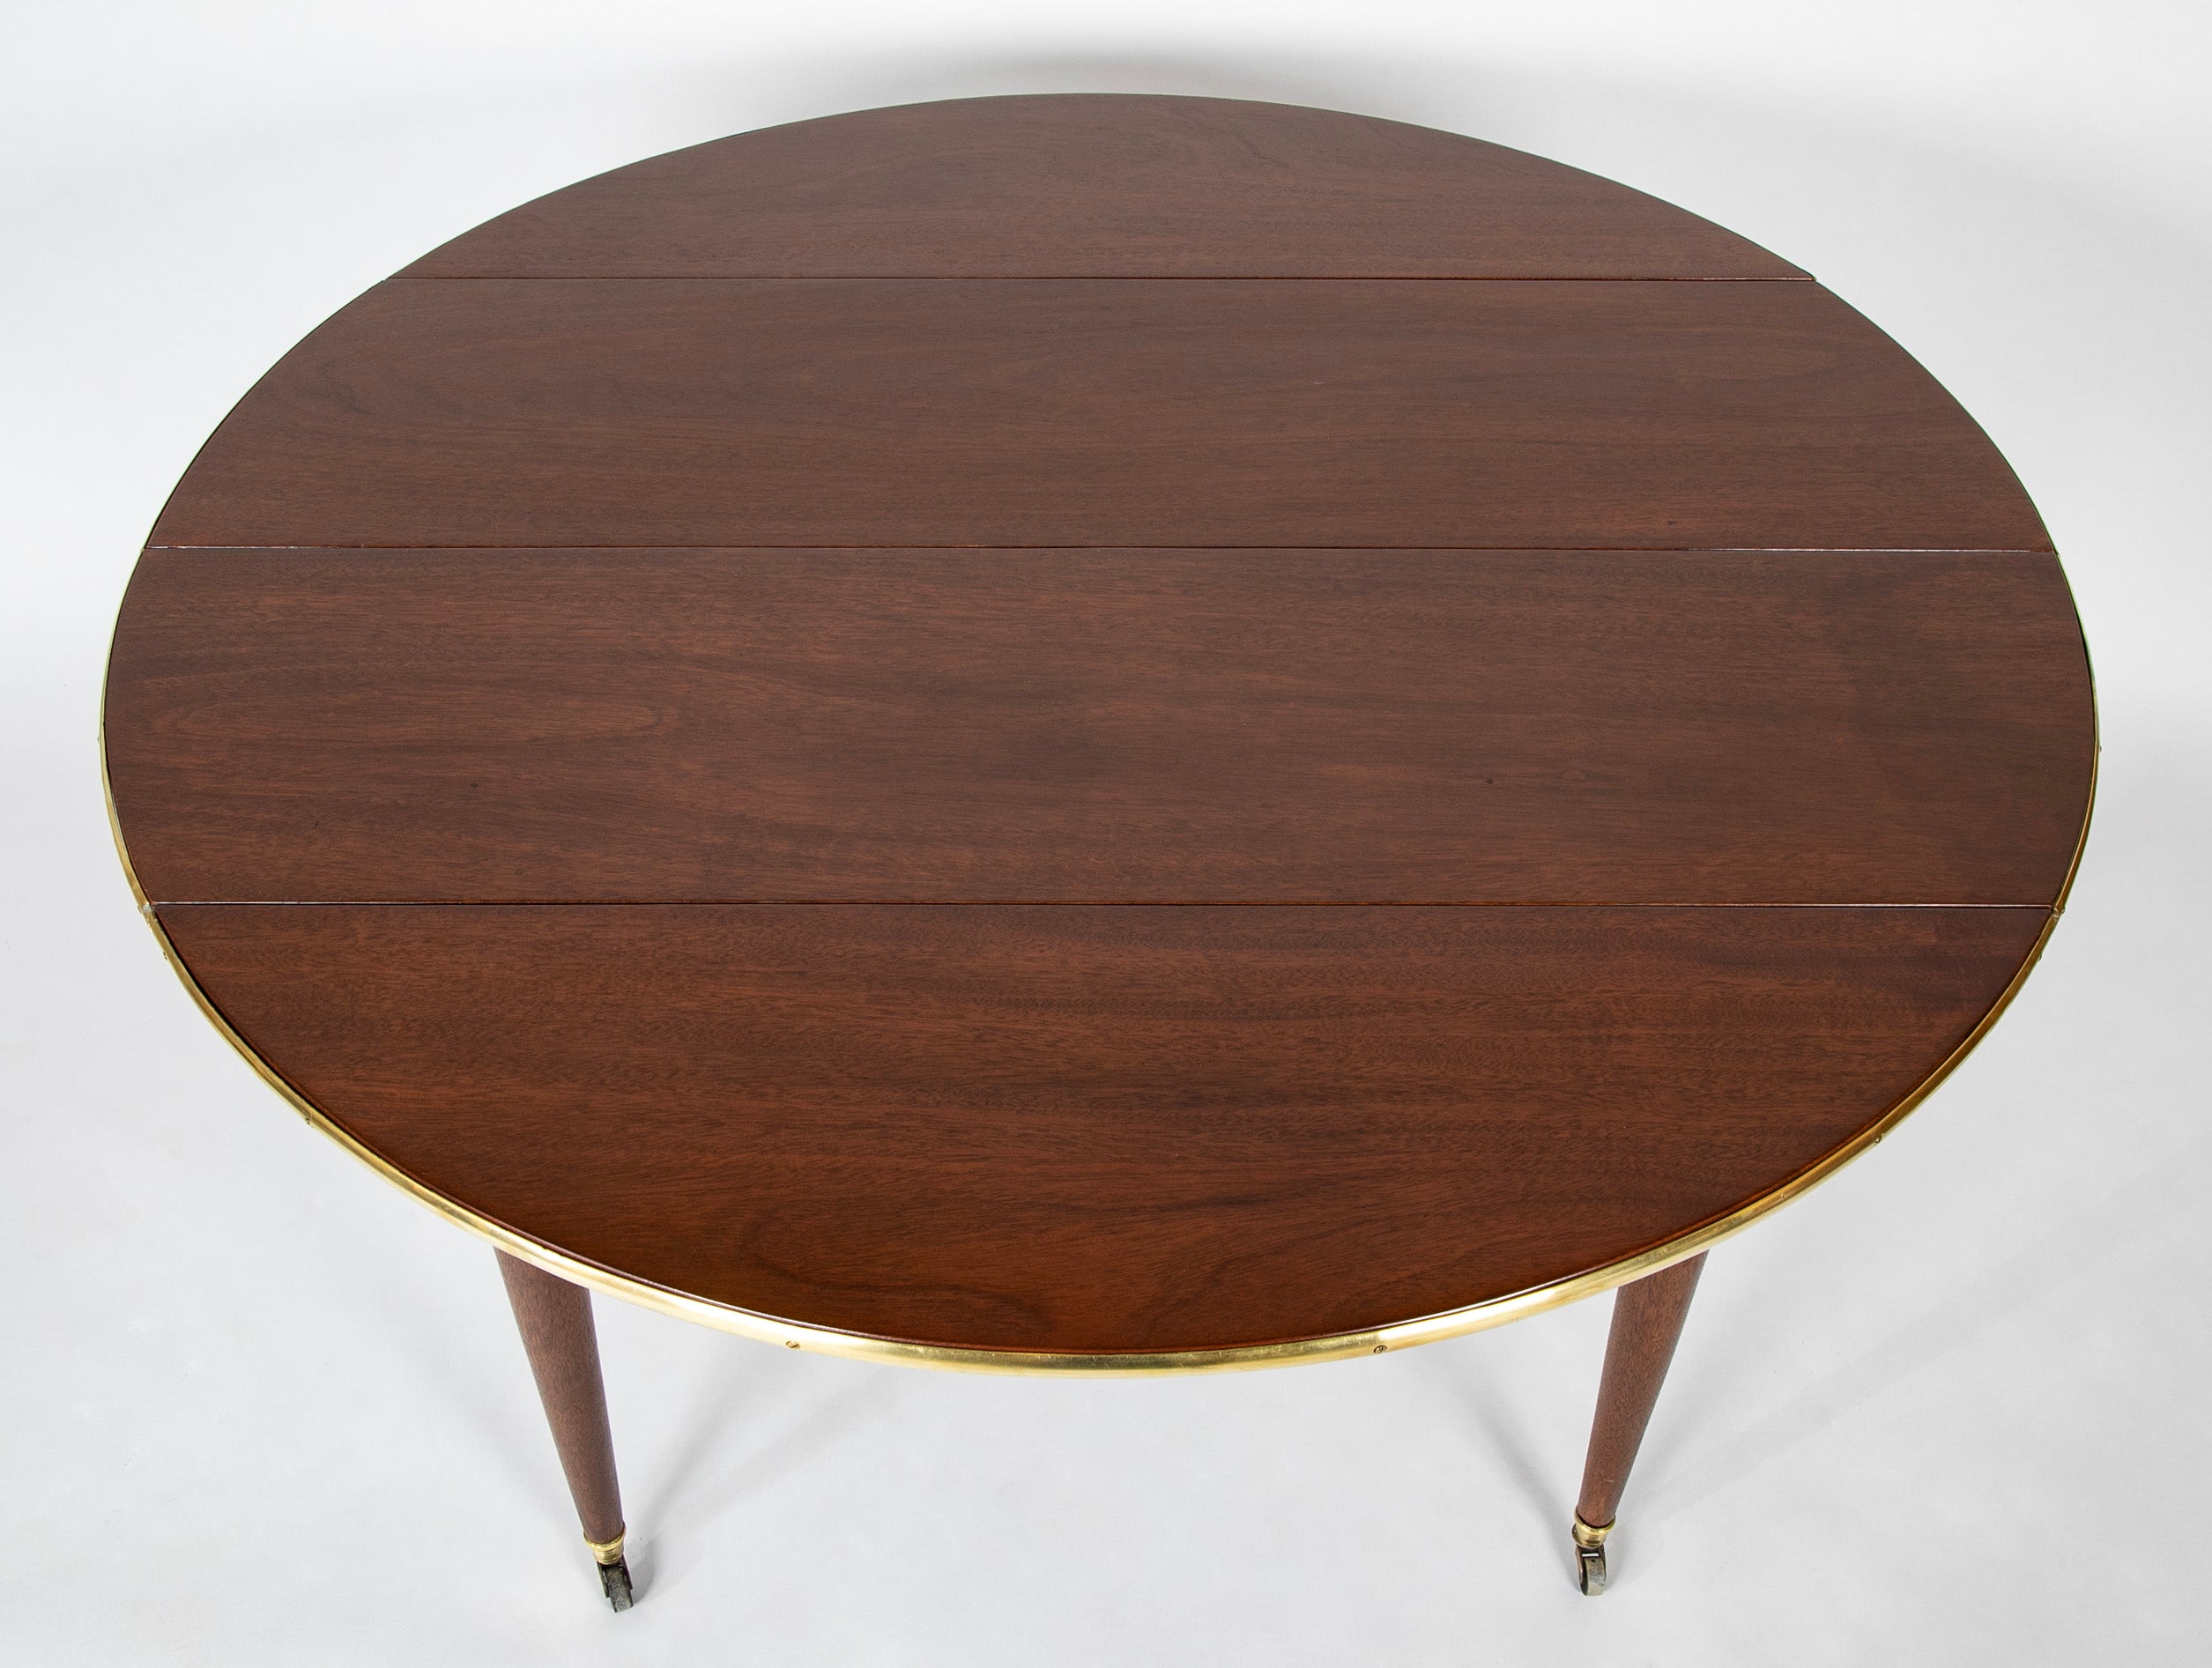 Louis XVI Style Mahogany Extension Dining Table with Four Leaves